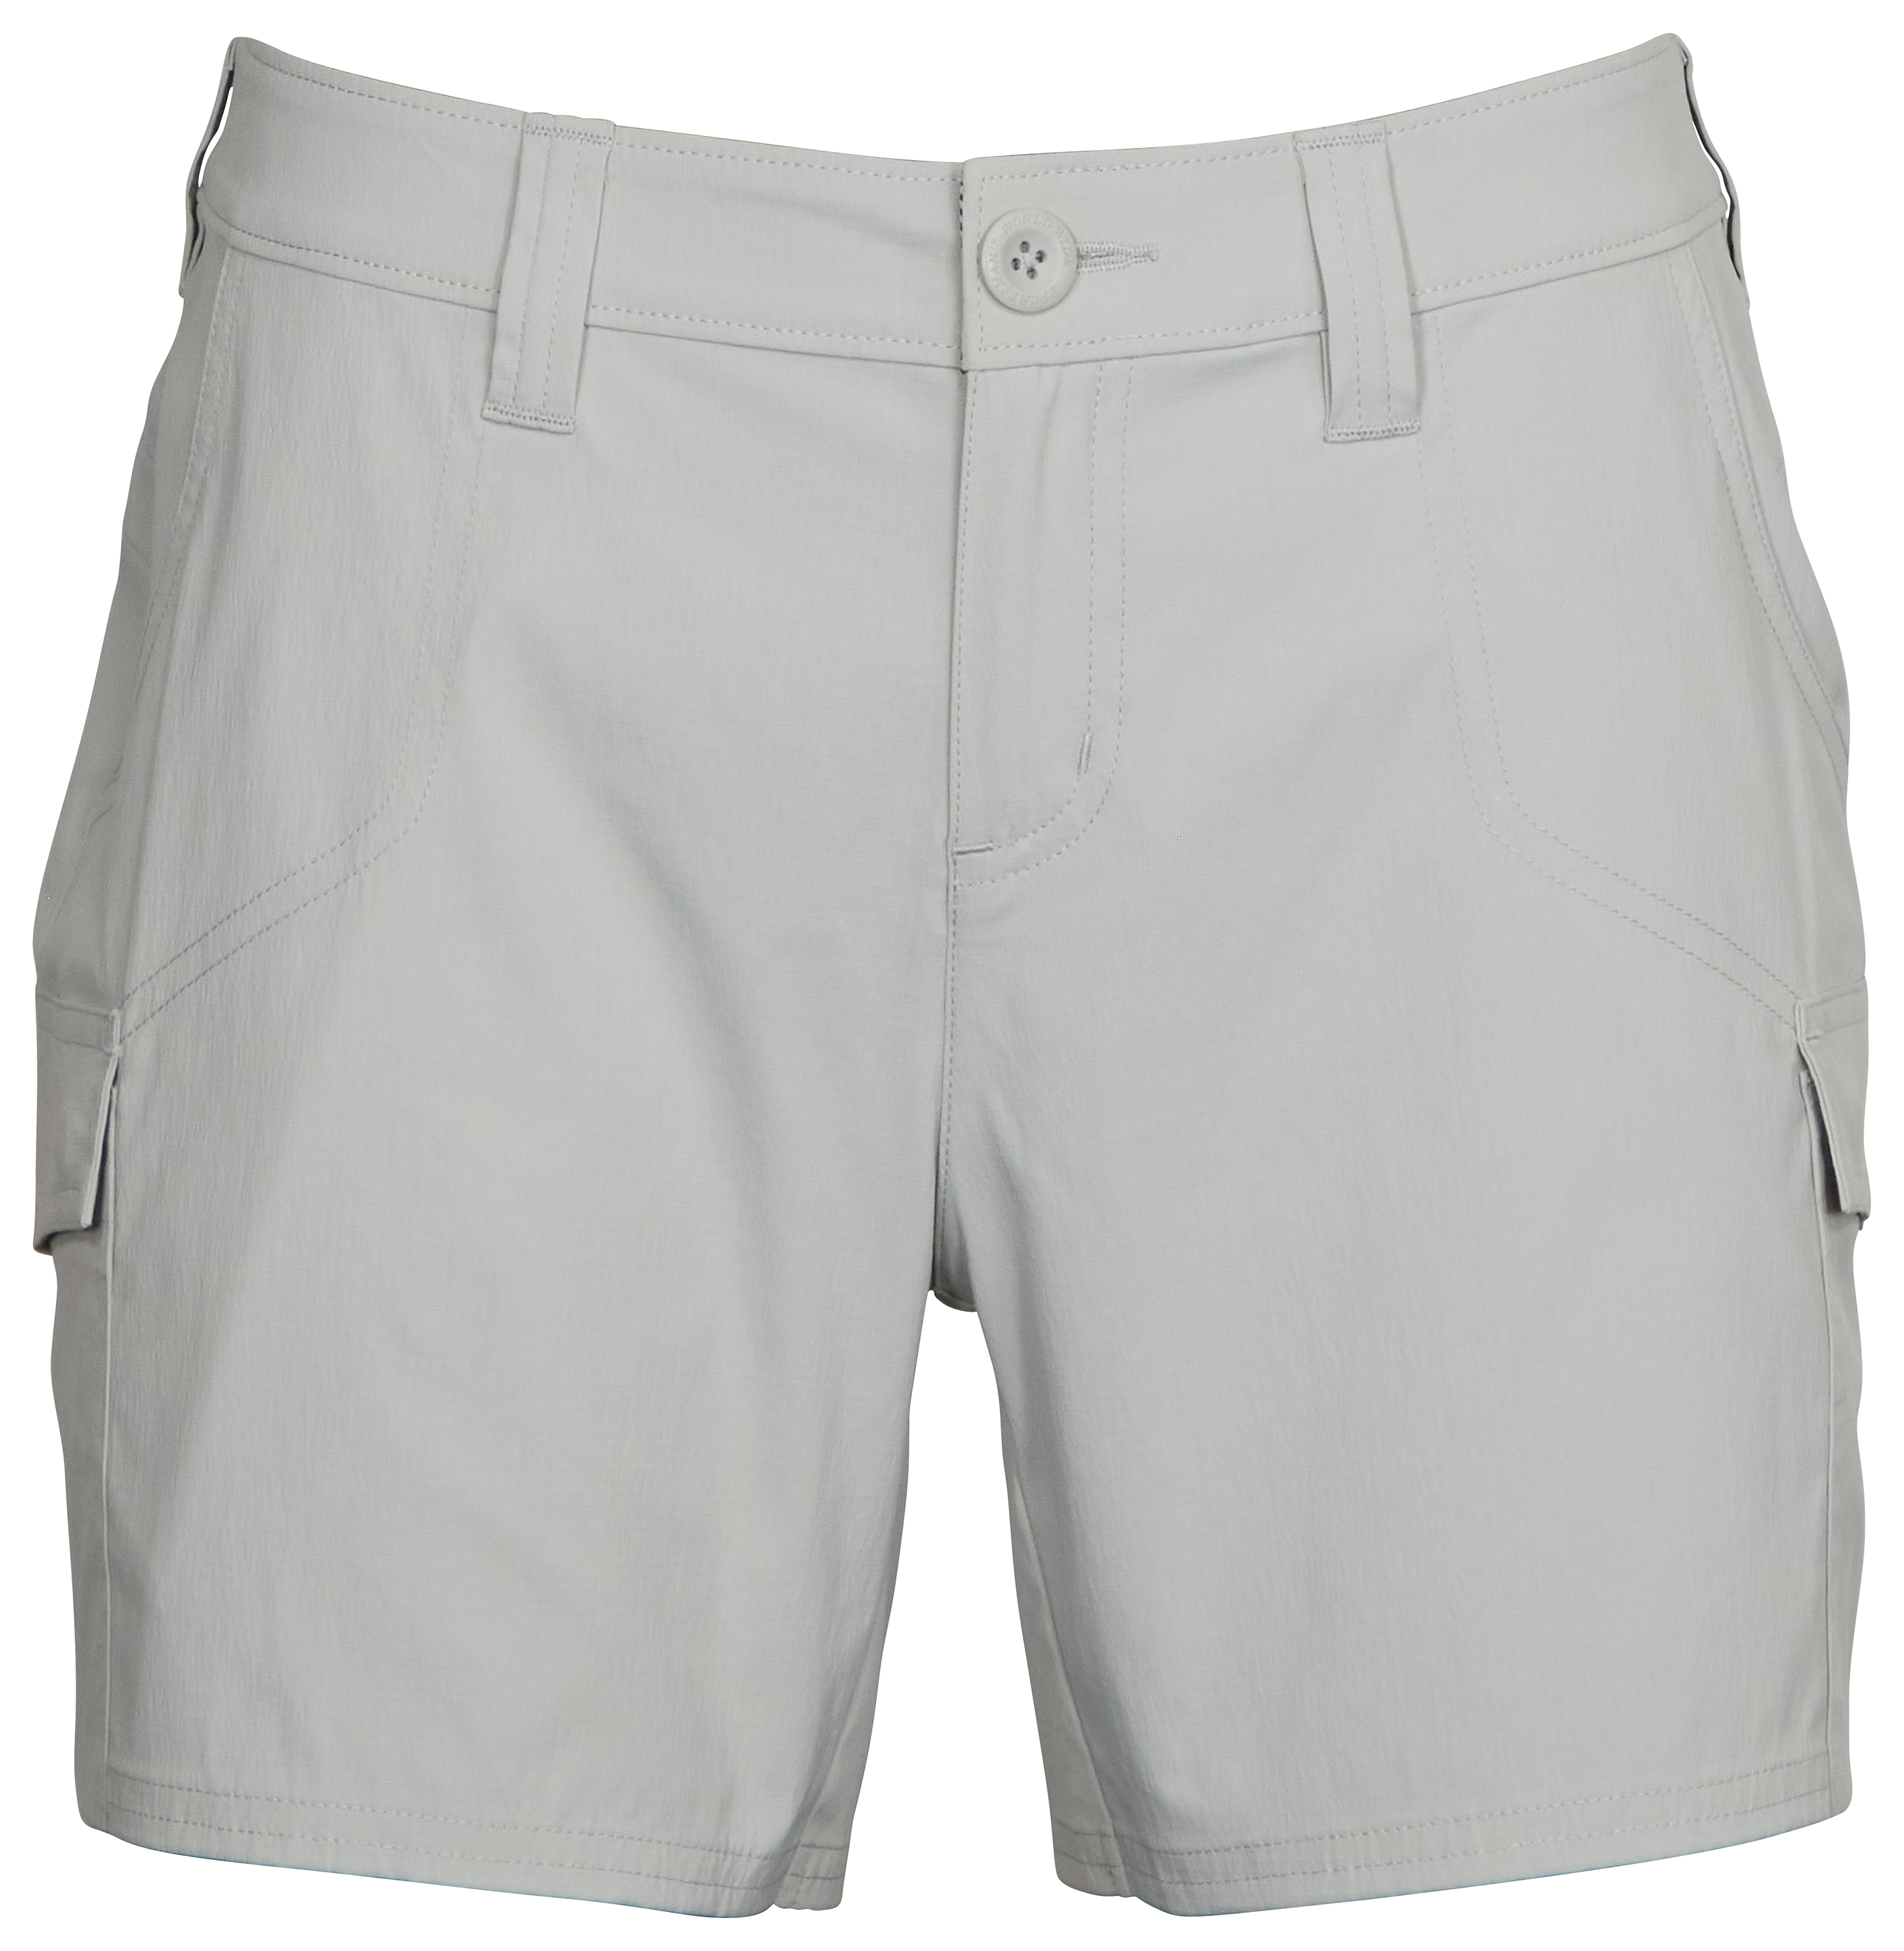 World Wide Sportsman Ripstop Cargo Shorts for Ladies - High Rise - 4